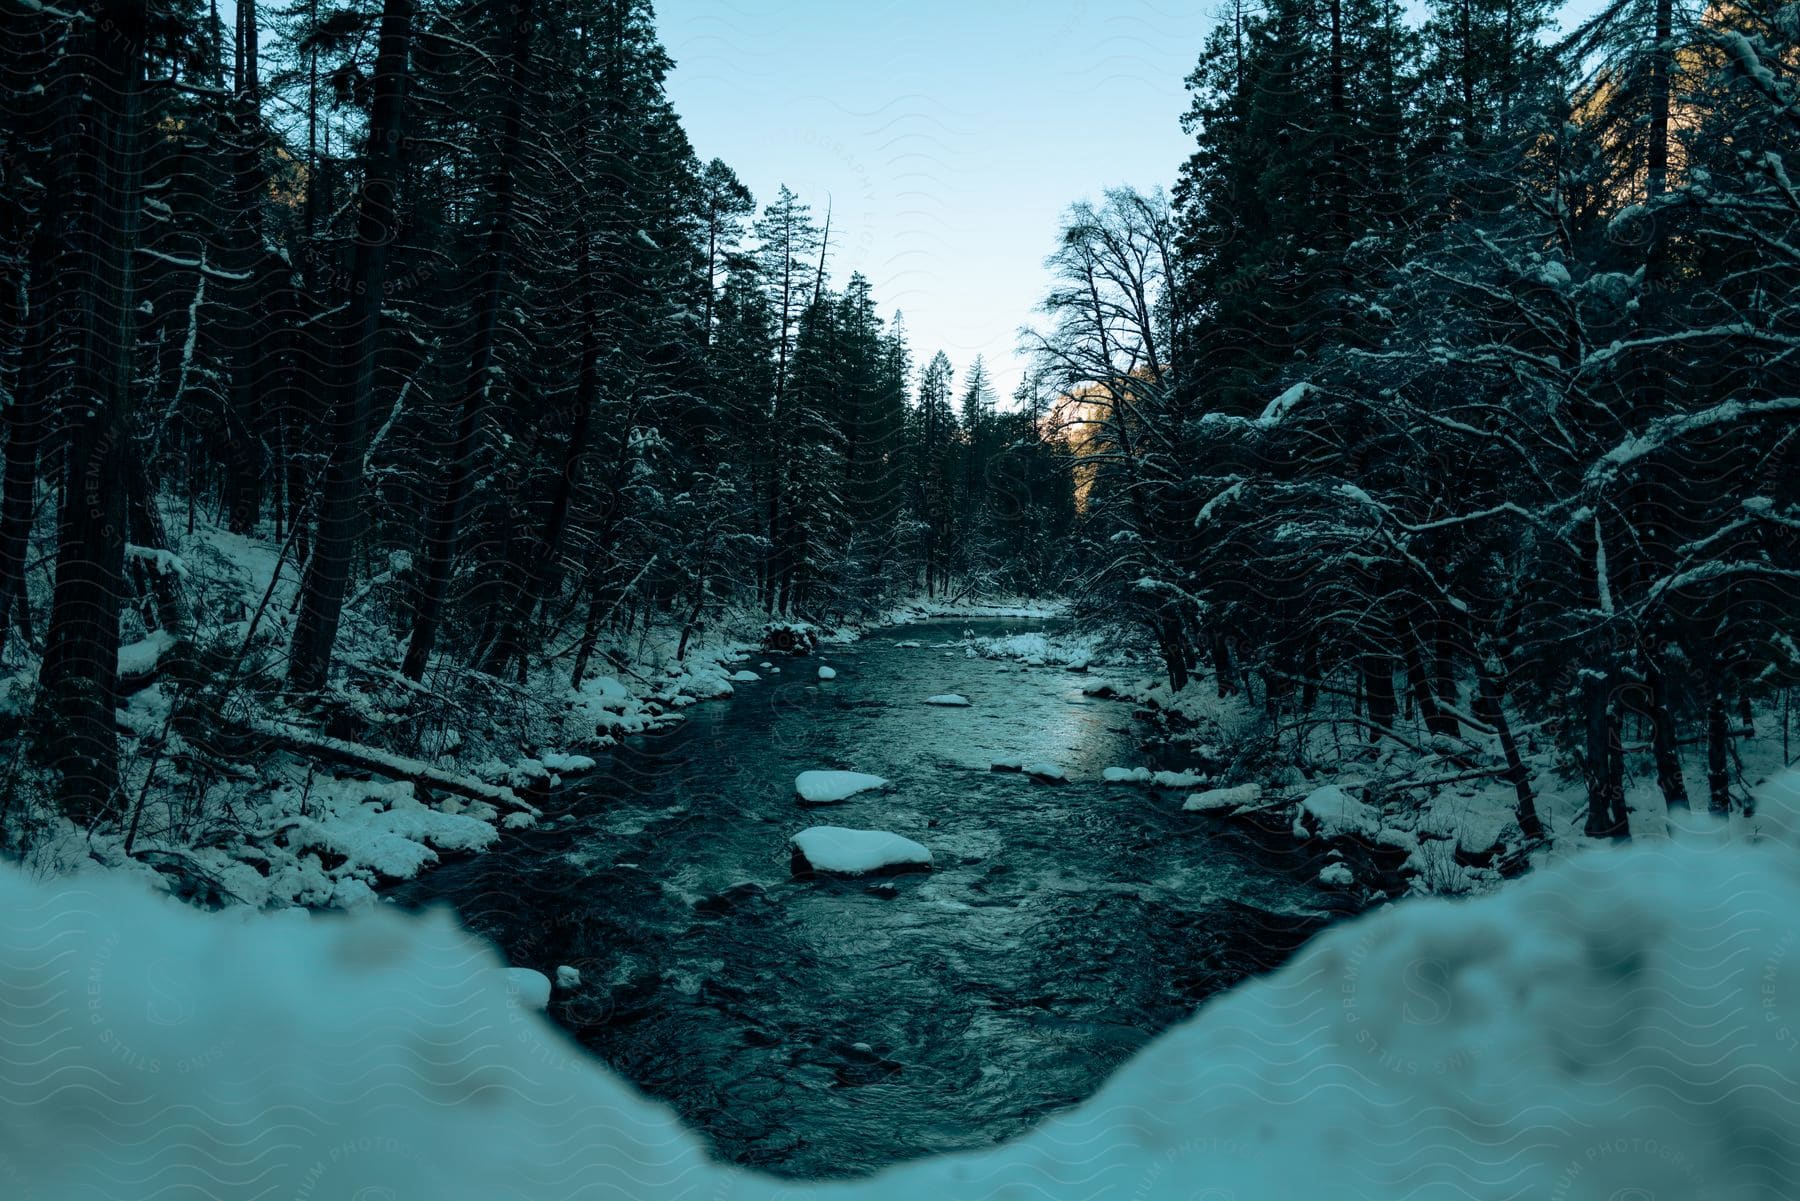 A creek running between pine trees with a snowcovered ground and the sun setting